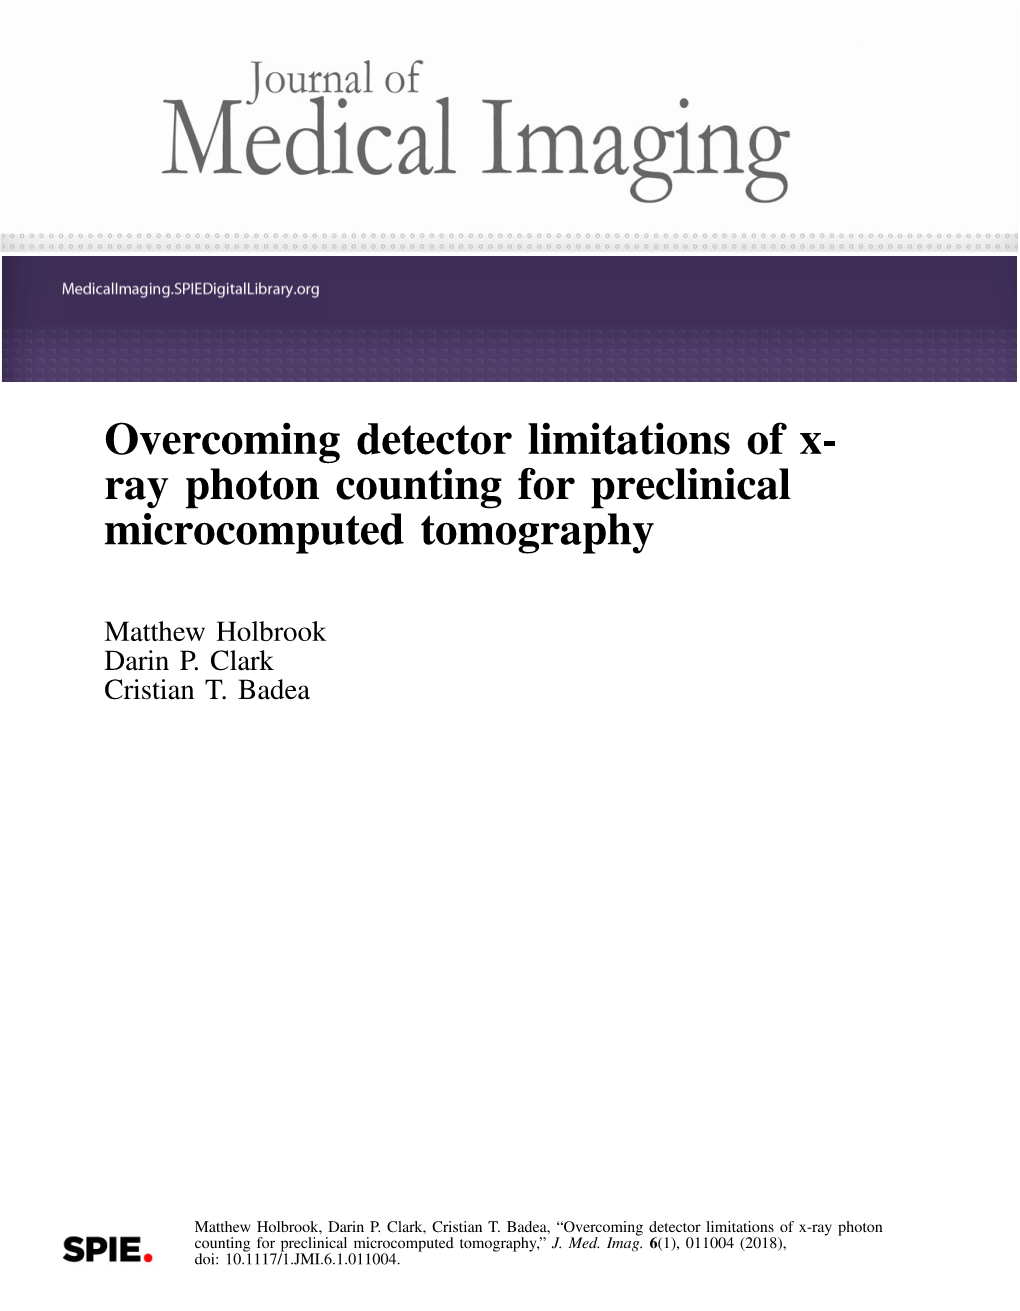 Overcoming Detector Limitations of X- Ray Photon Counting for Preclinical Microcomputed Tomography